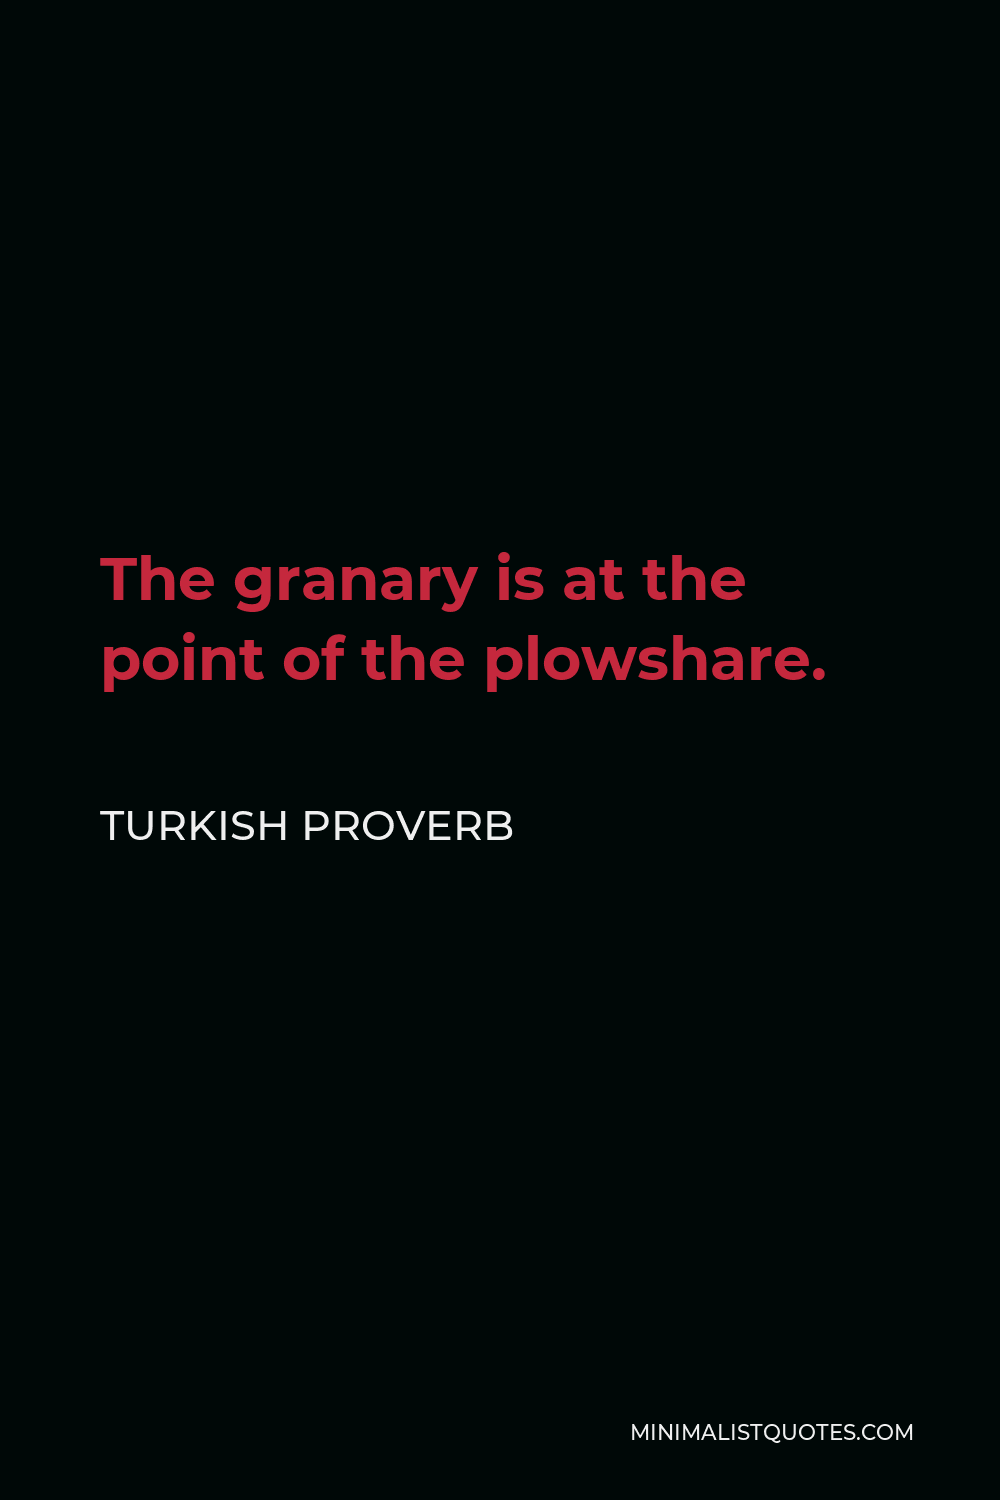 Turkish Proverb Quote - The granary is at the point of the plowshare.